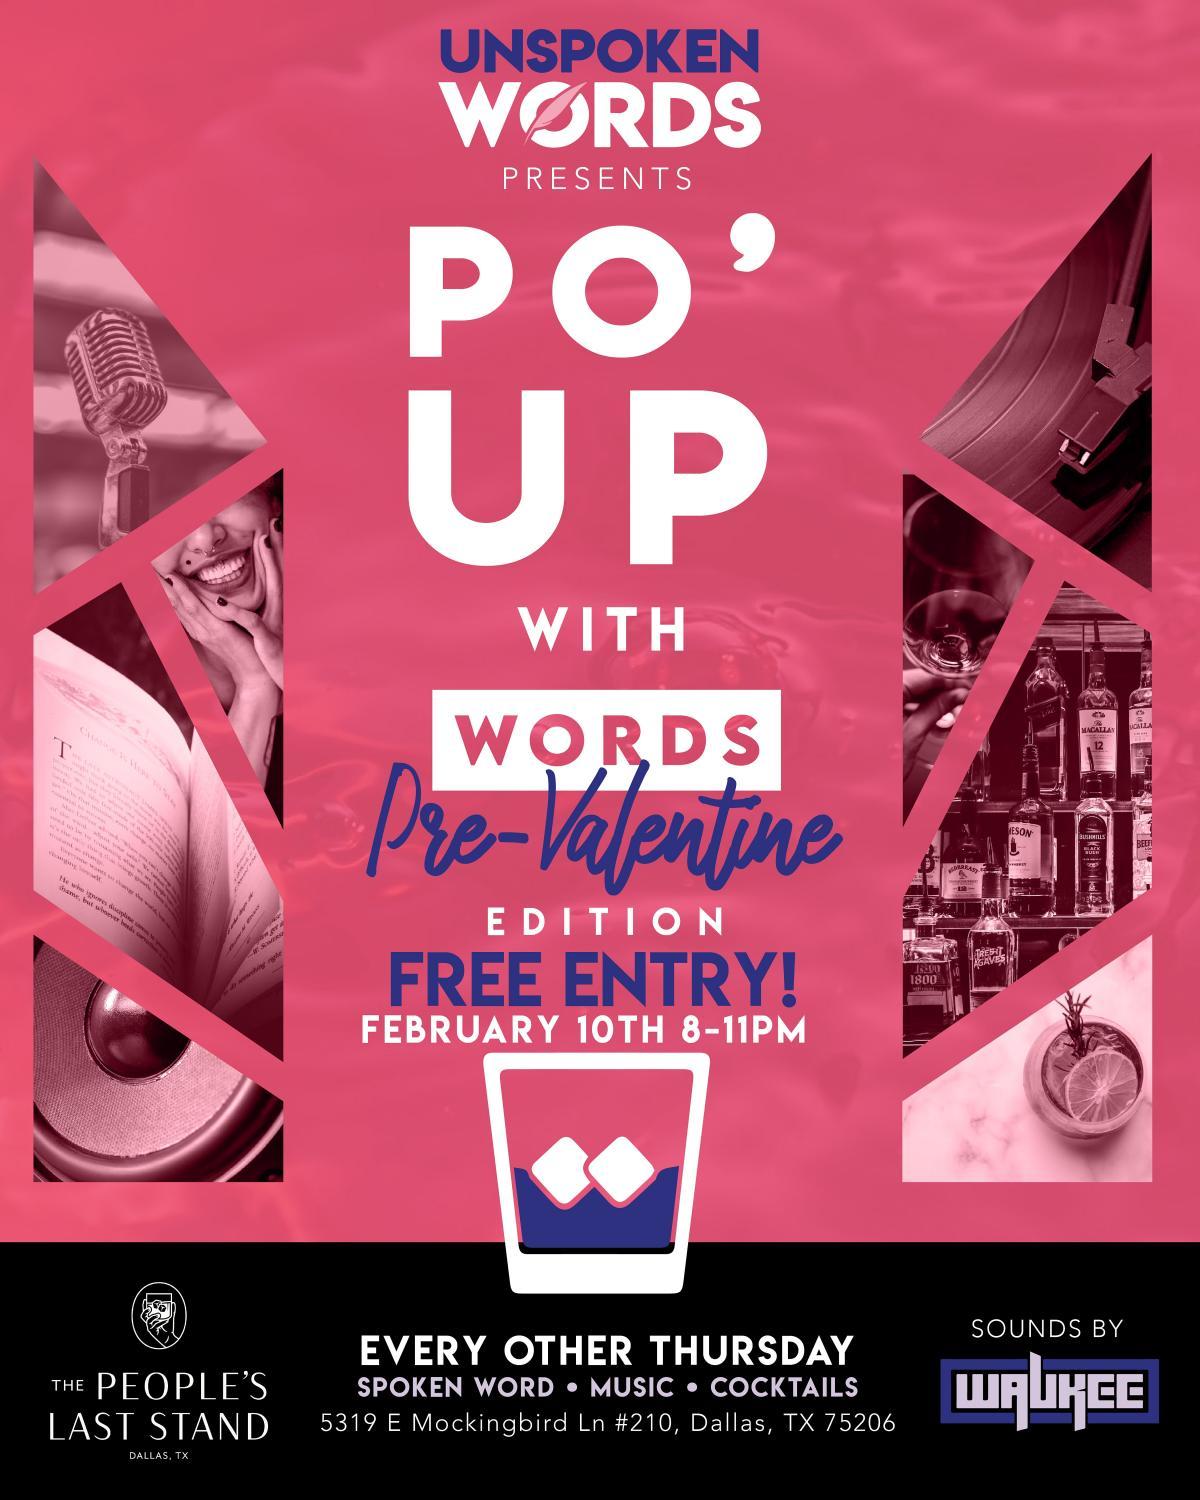 Po'Up with Words Pre-Valentine's Day Event